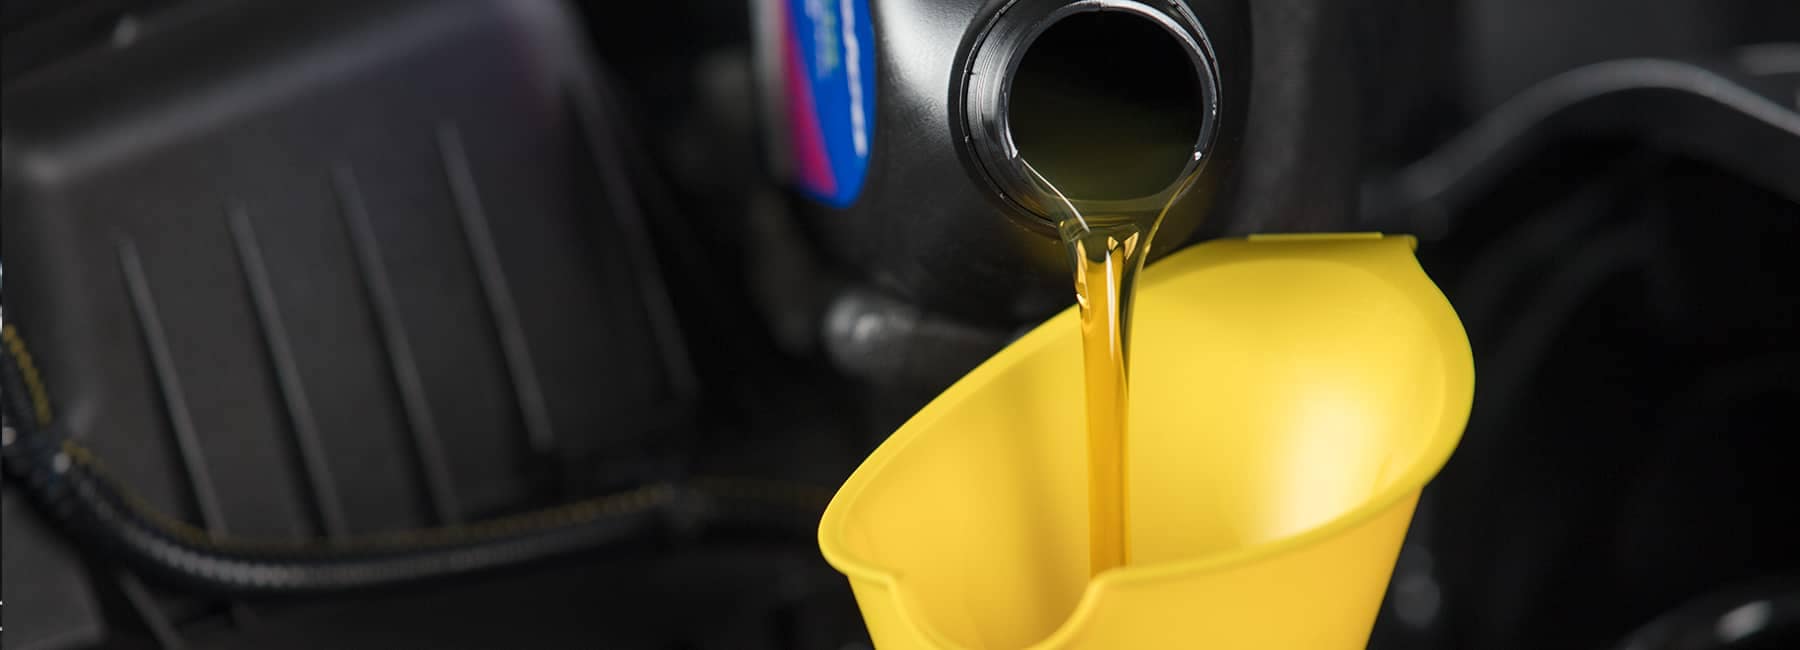 Oil pouring into car engine